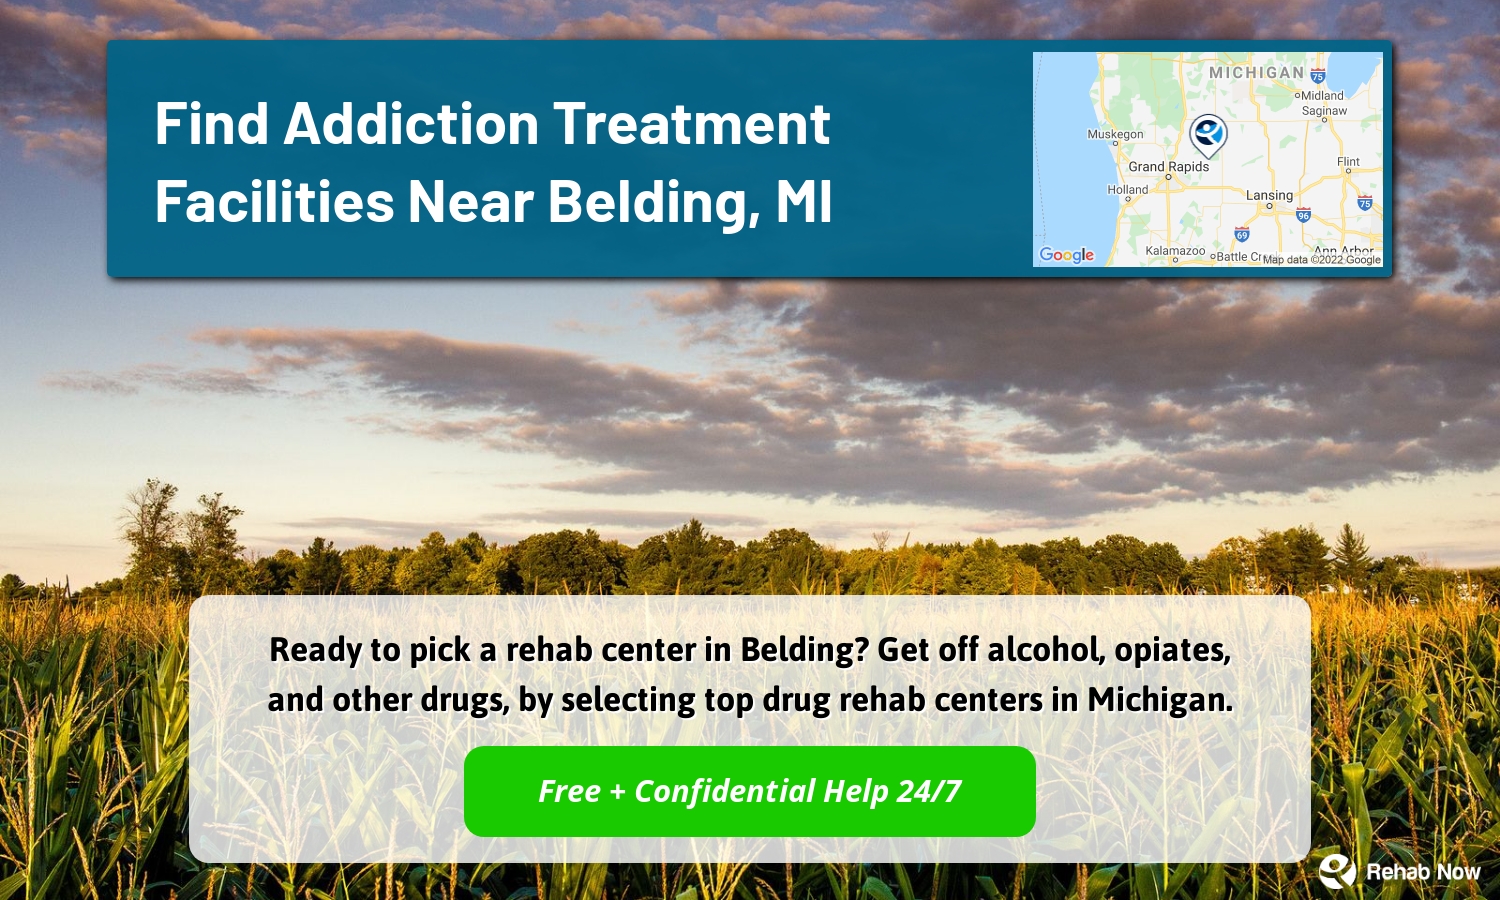 Ready to pick a rehab center in Belding? Get off alcohol, opiates, and other drugs, by selecting top drug rehab centers in Michigan.